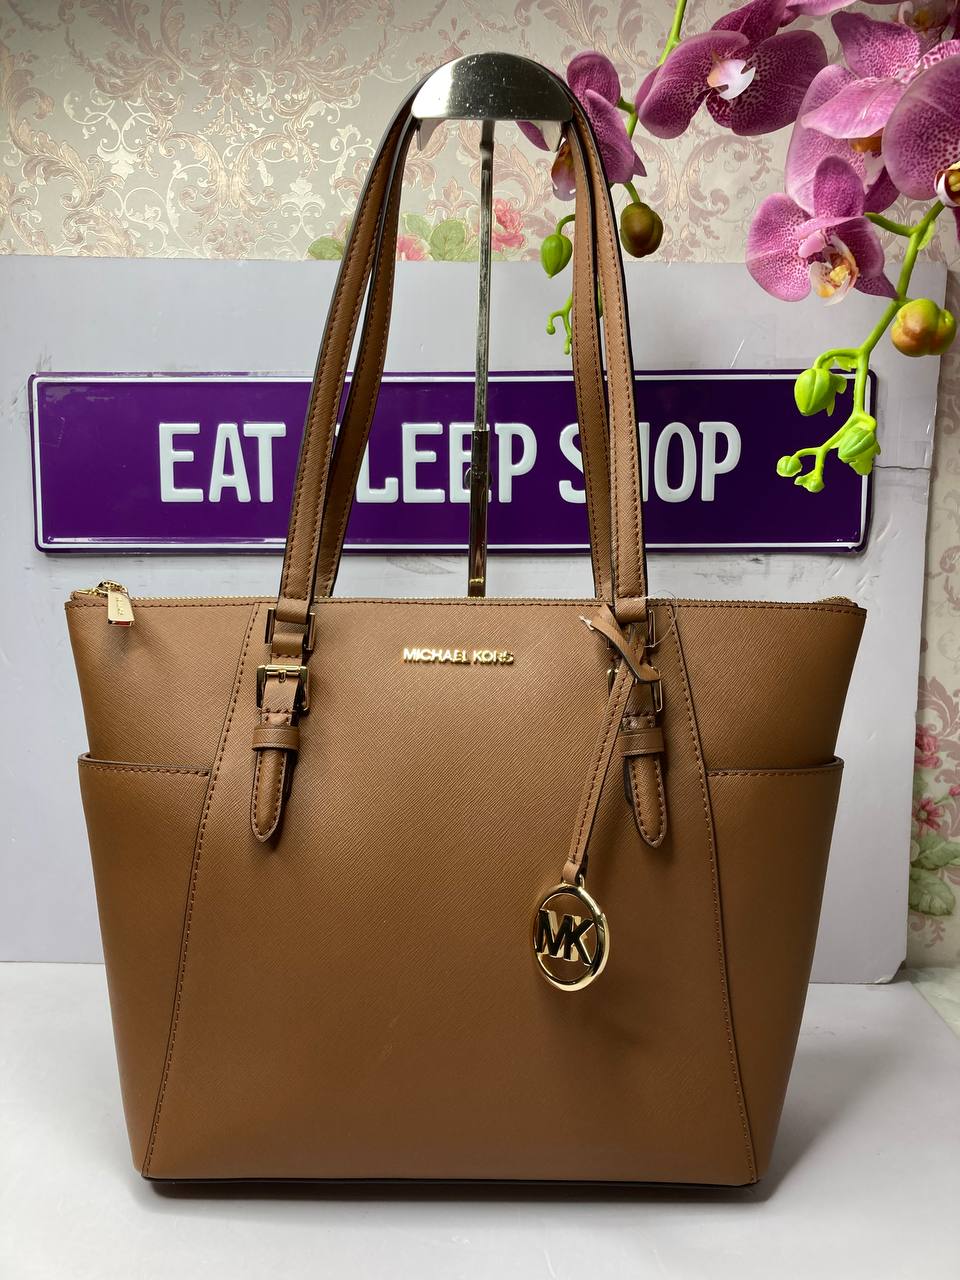 michael kors charlotte large saffiano leather top zip tote bag